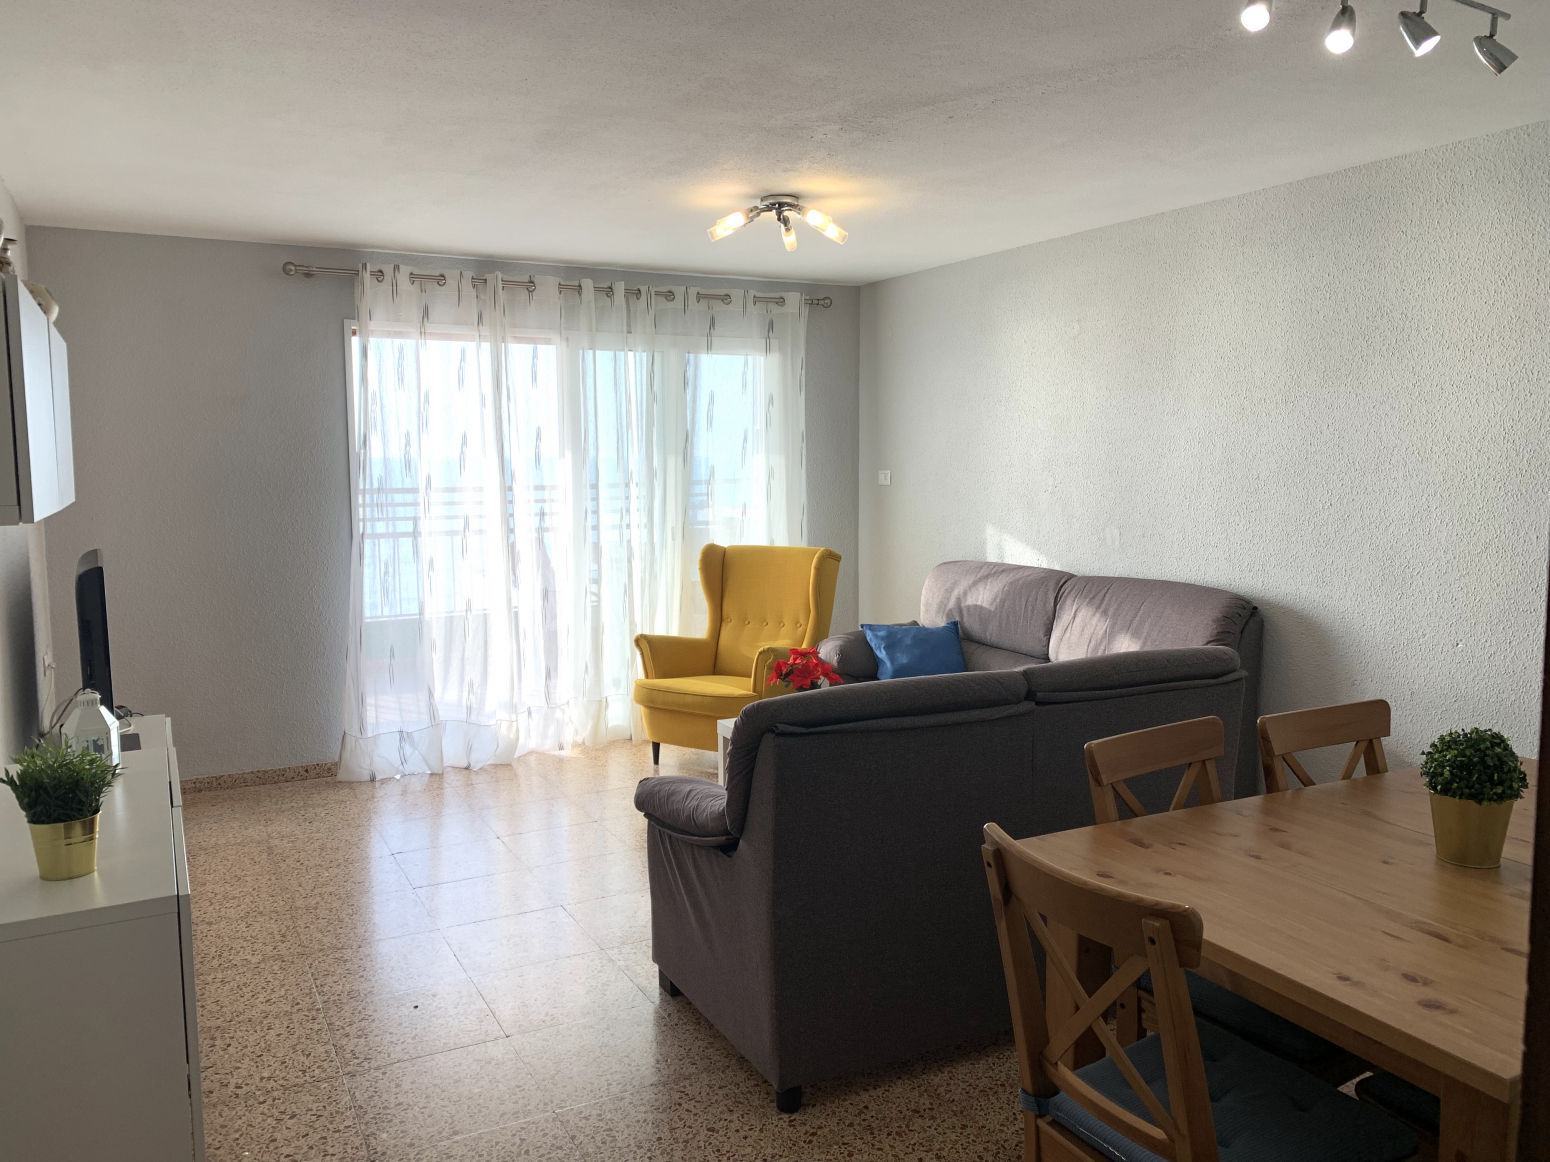 For Sale. APARTMENT in NULES